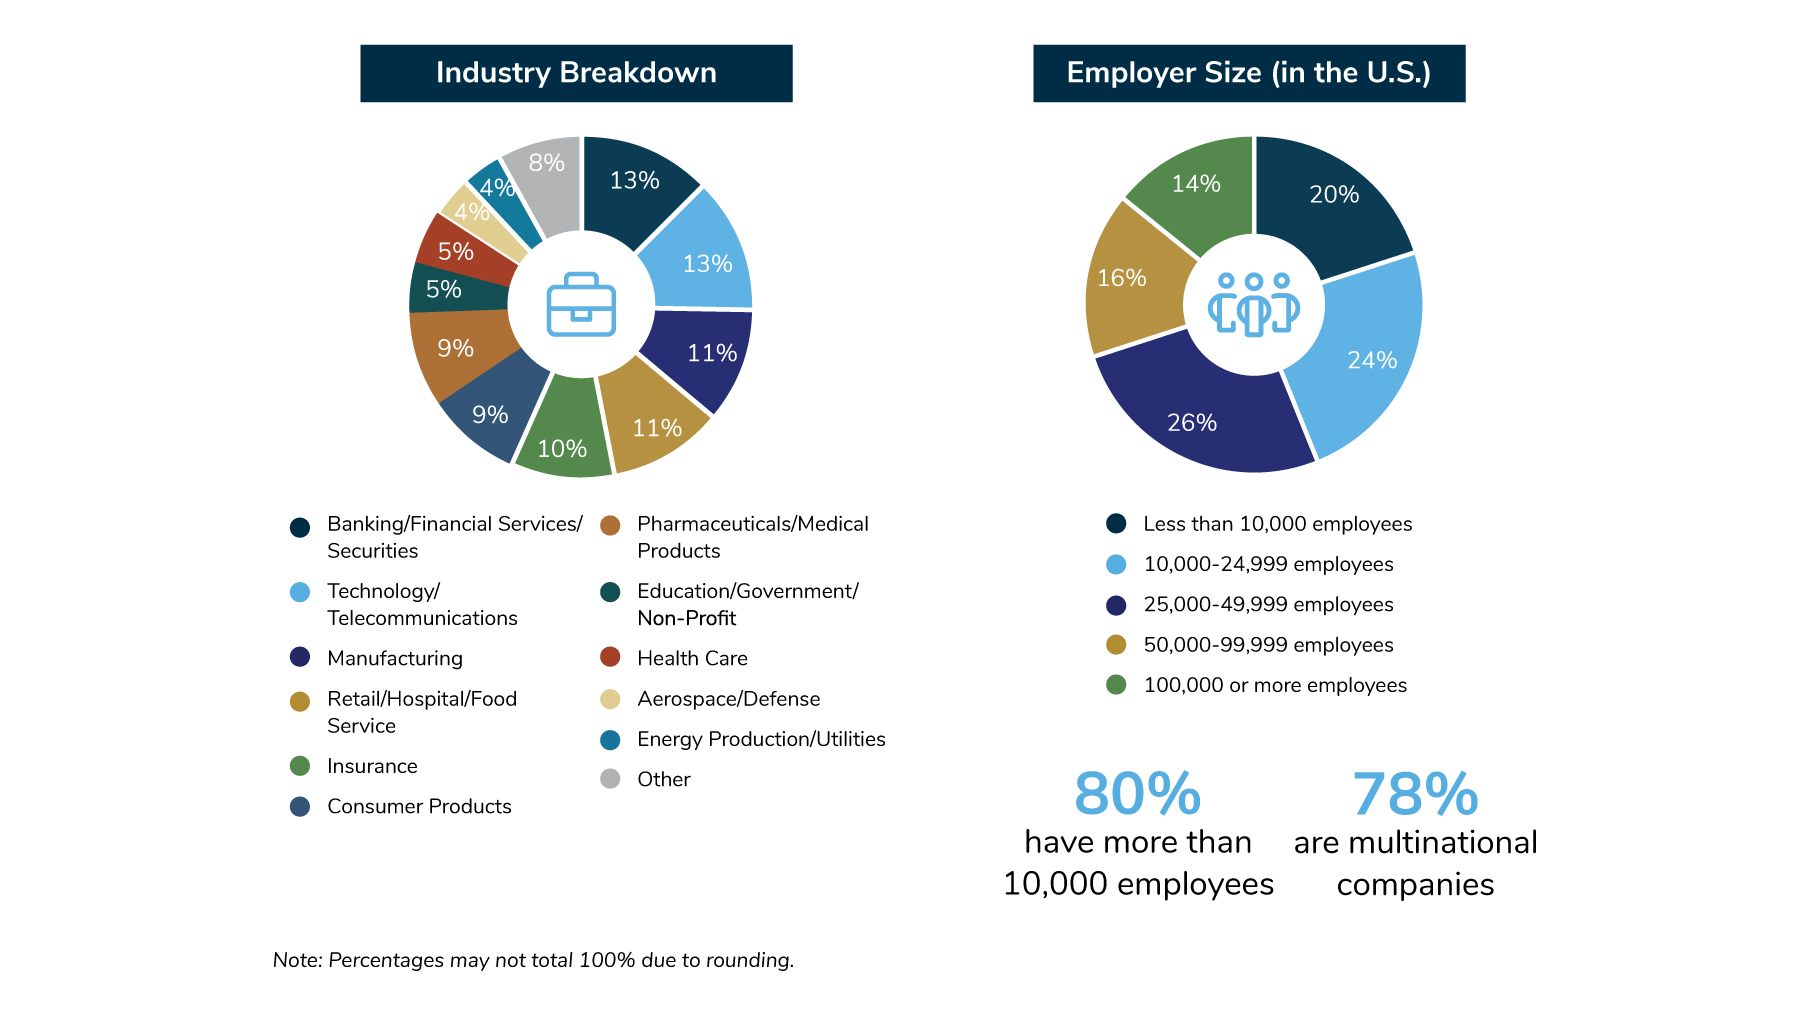 Respondents represented a wide array of industries including: Banking/Financial Services/Securities; Technology/Telecommunications; Manufacturing; Retail/Hospitality/Food Service; Insurance; and many others. 80% of employers employ 10,000 or more employees. 78% are multinational employers.